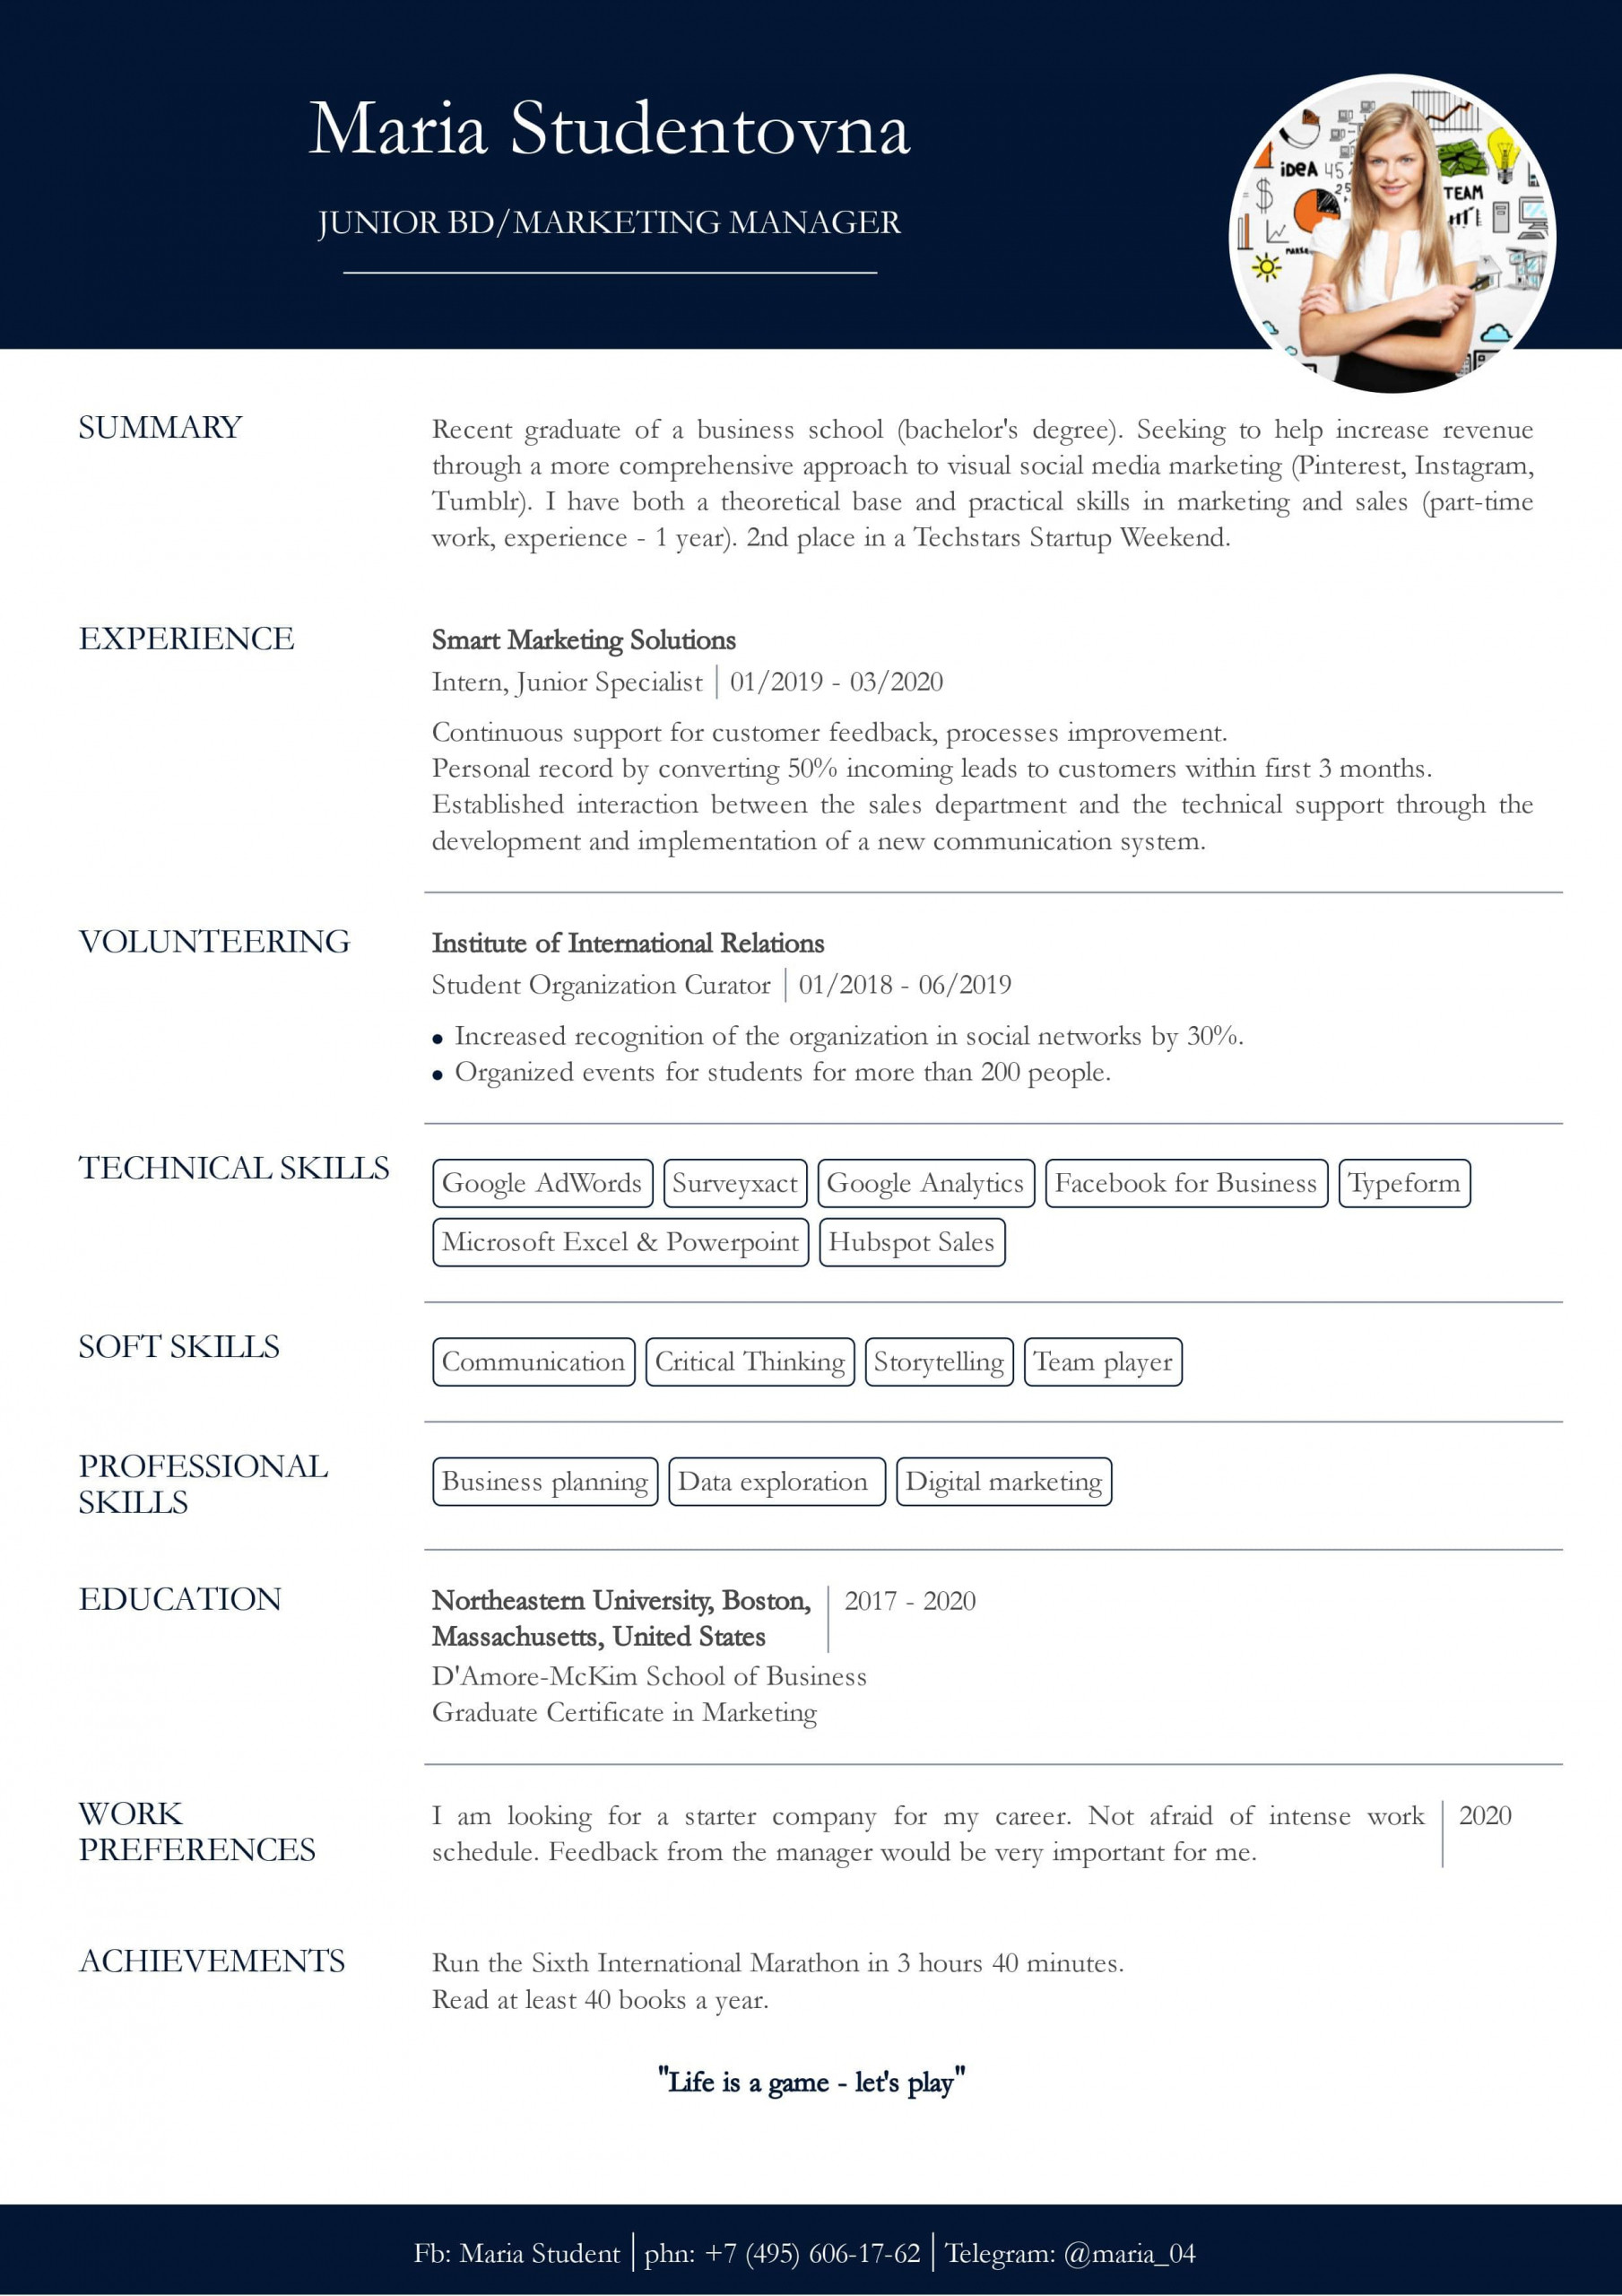 Sample Resume for Non High School Graduate Resume with No Work Experience. Sample for Students. – Cv2you Blog